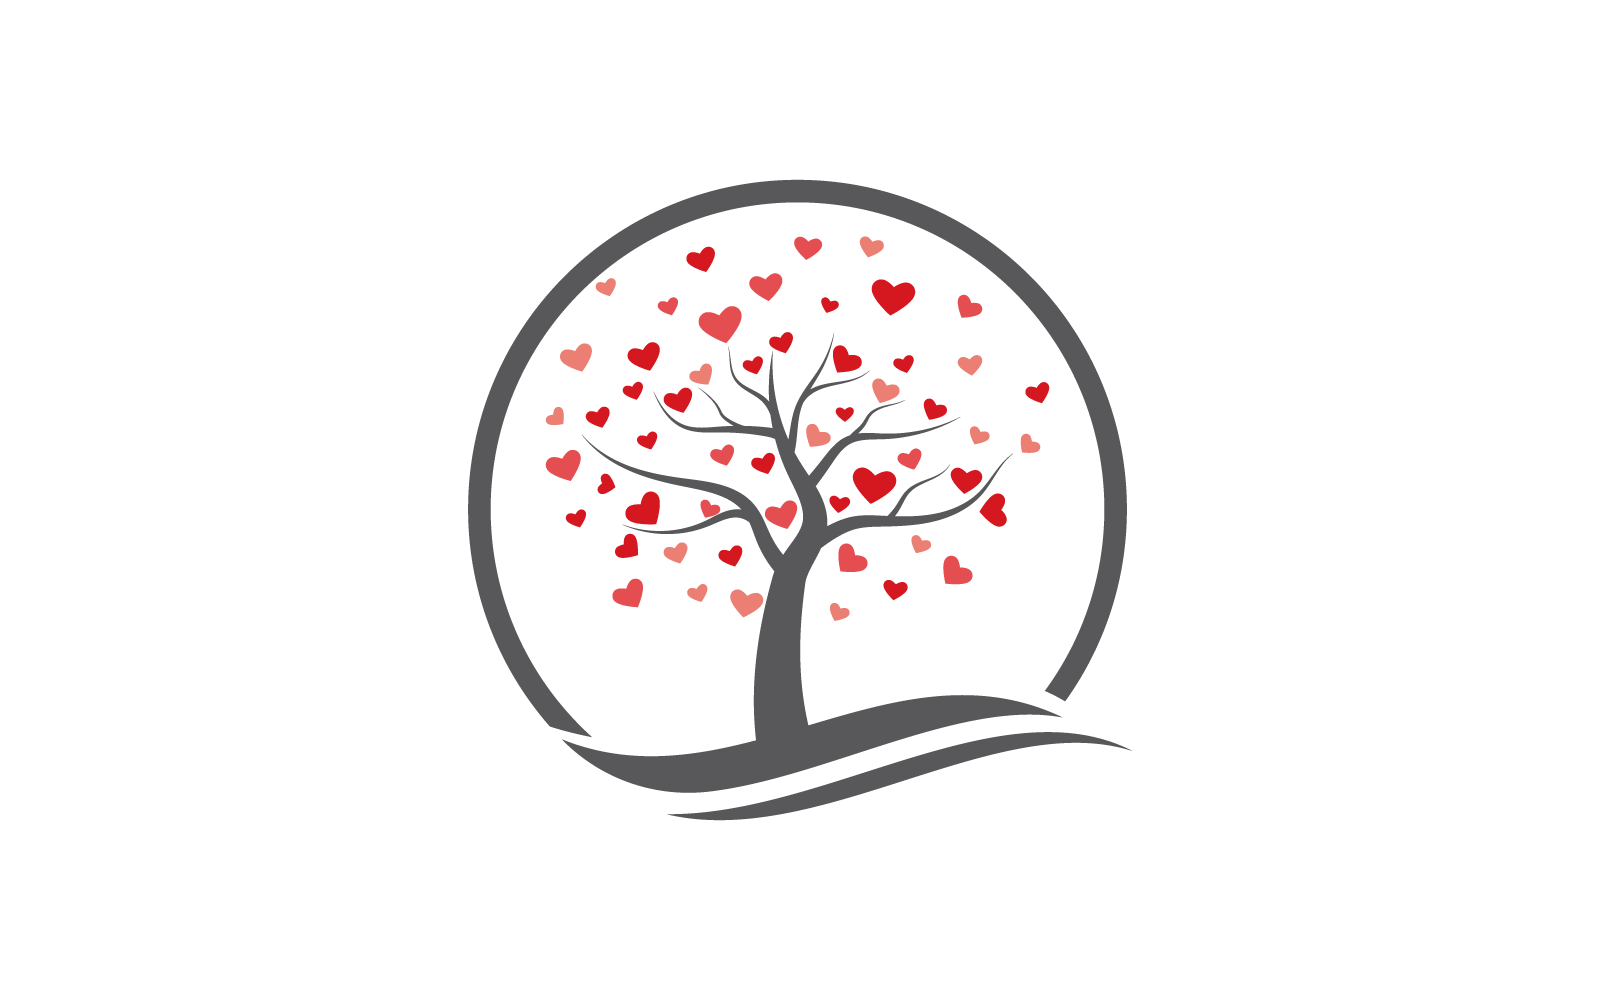 Love Tree Logo or Tree With Heart Leaves Logo Vector Design